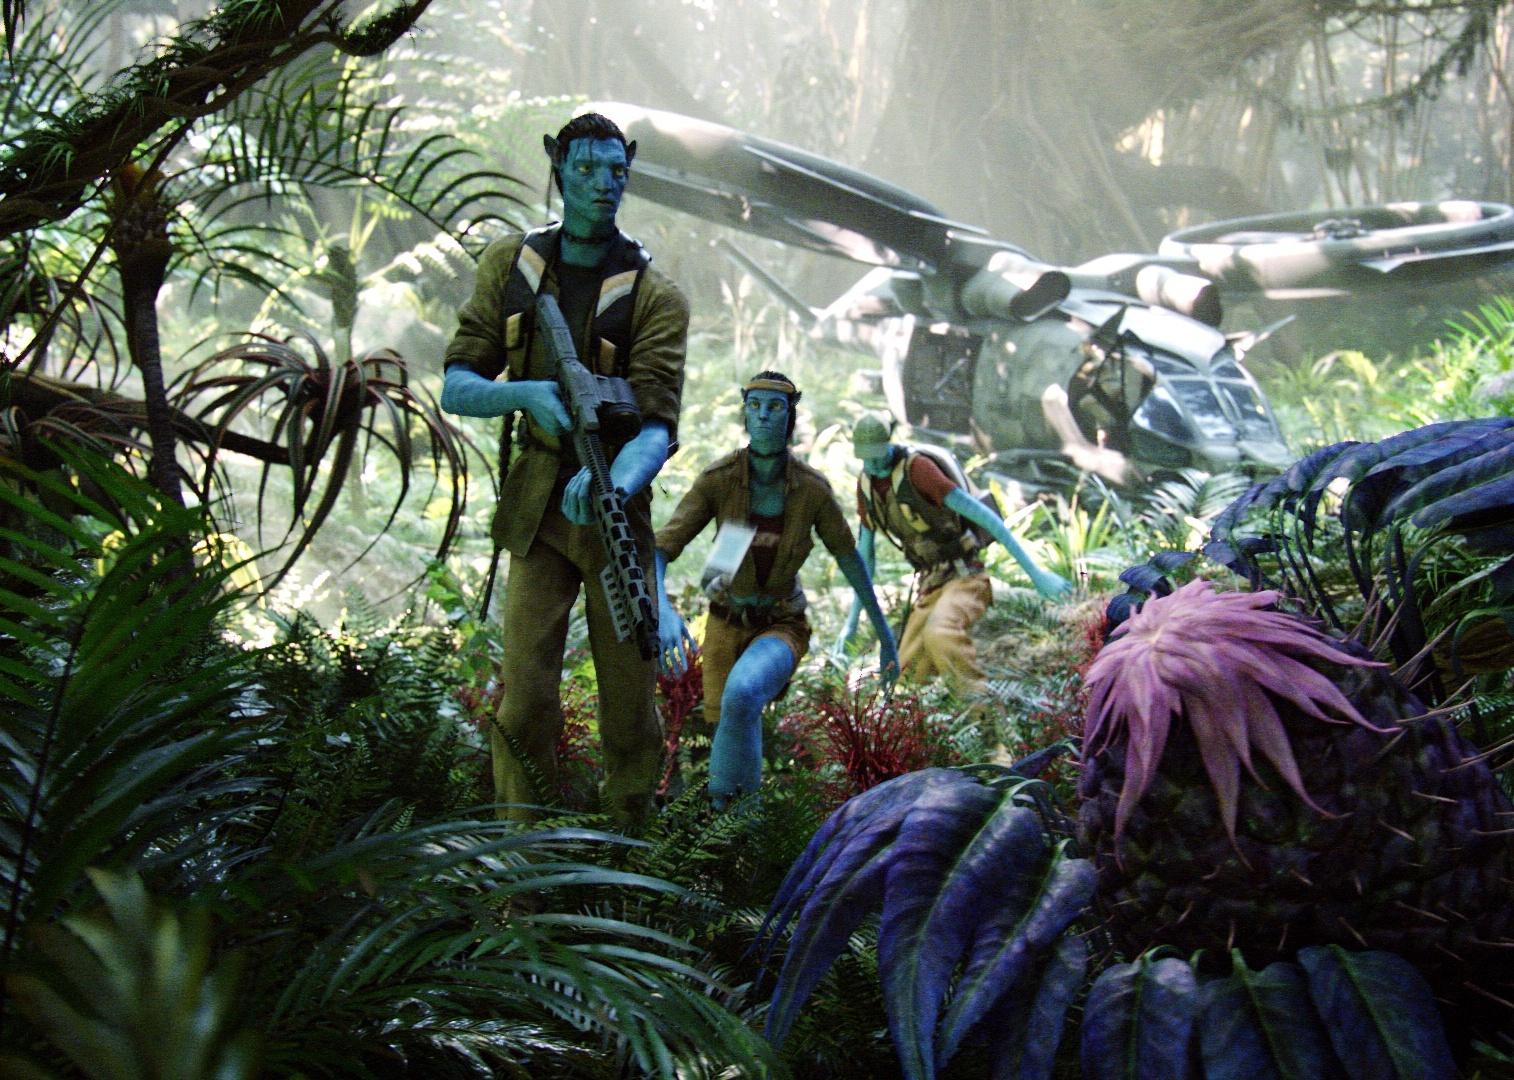 Blue Avatar people walking with guns from an aircraft in the jungle.